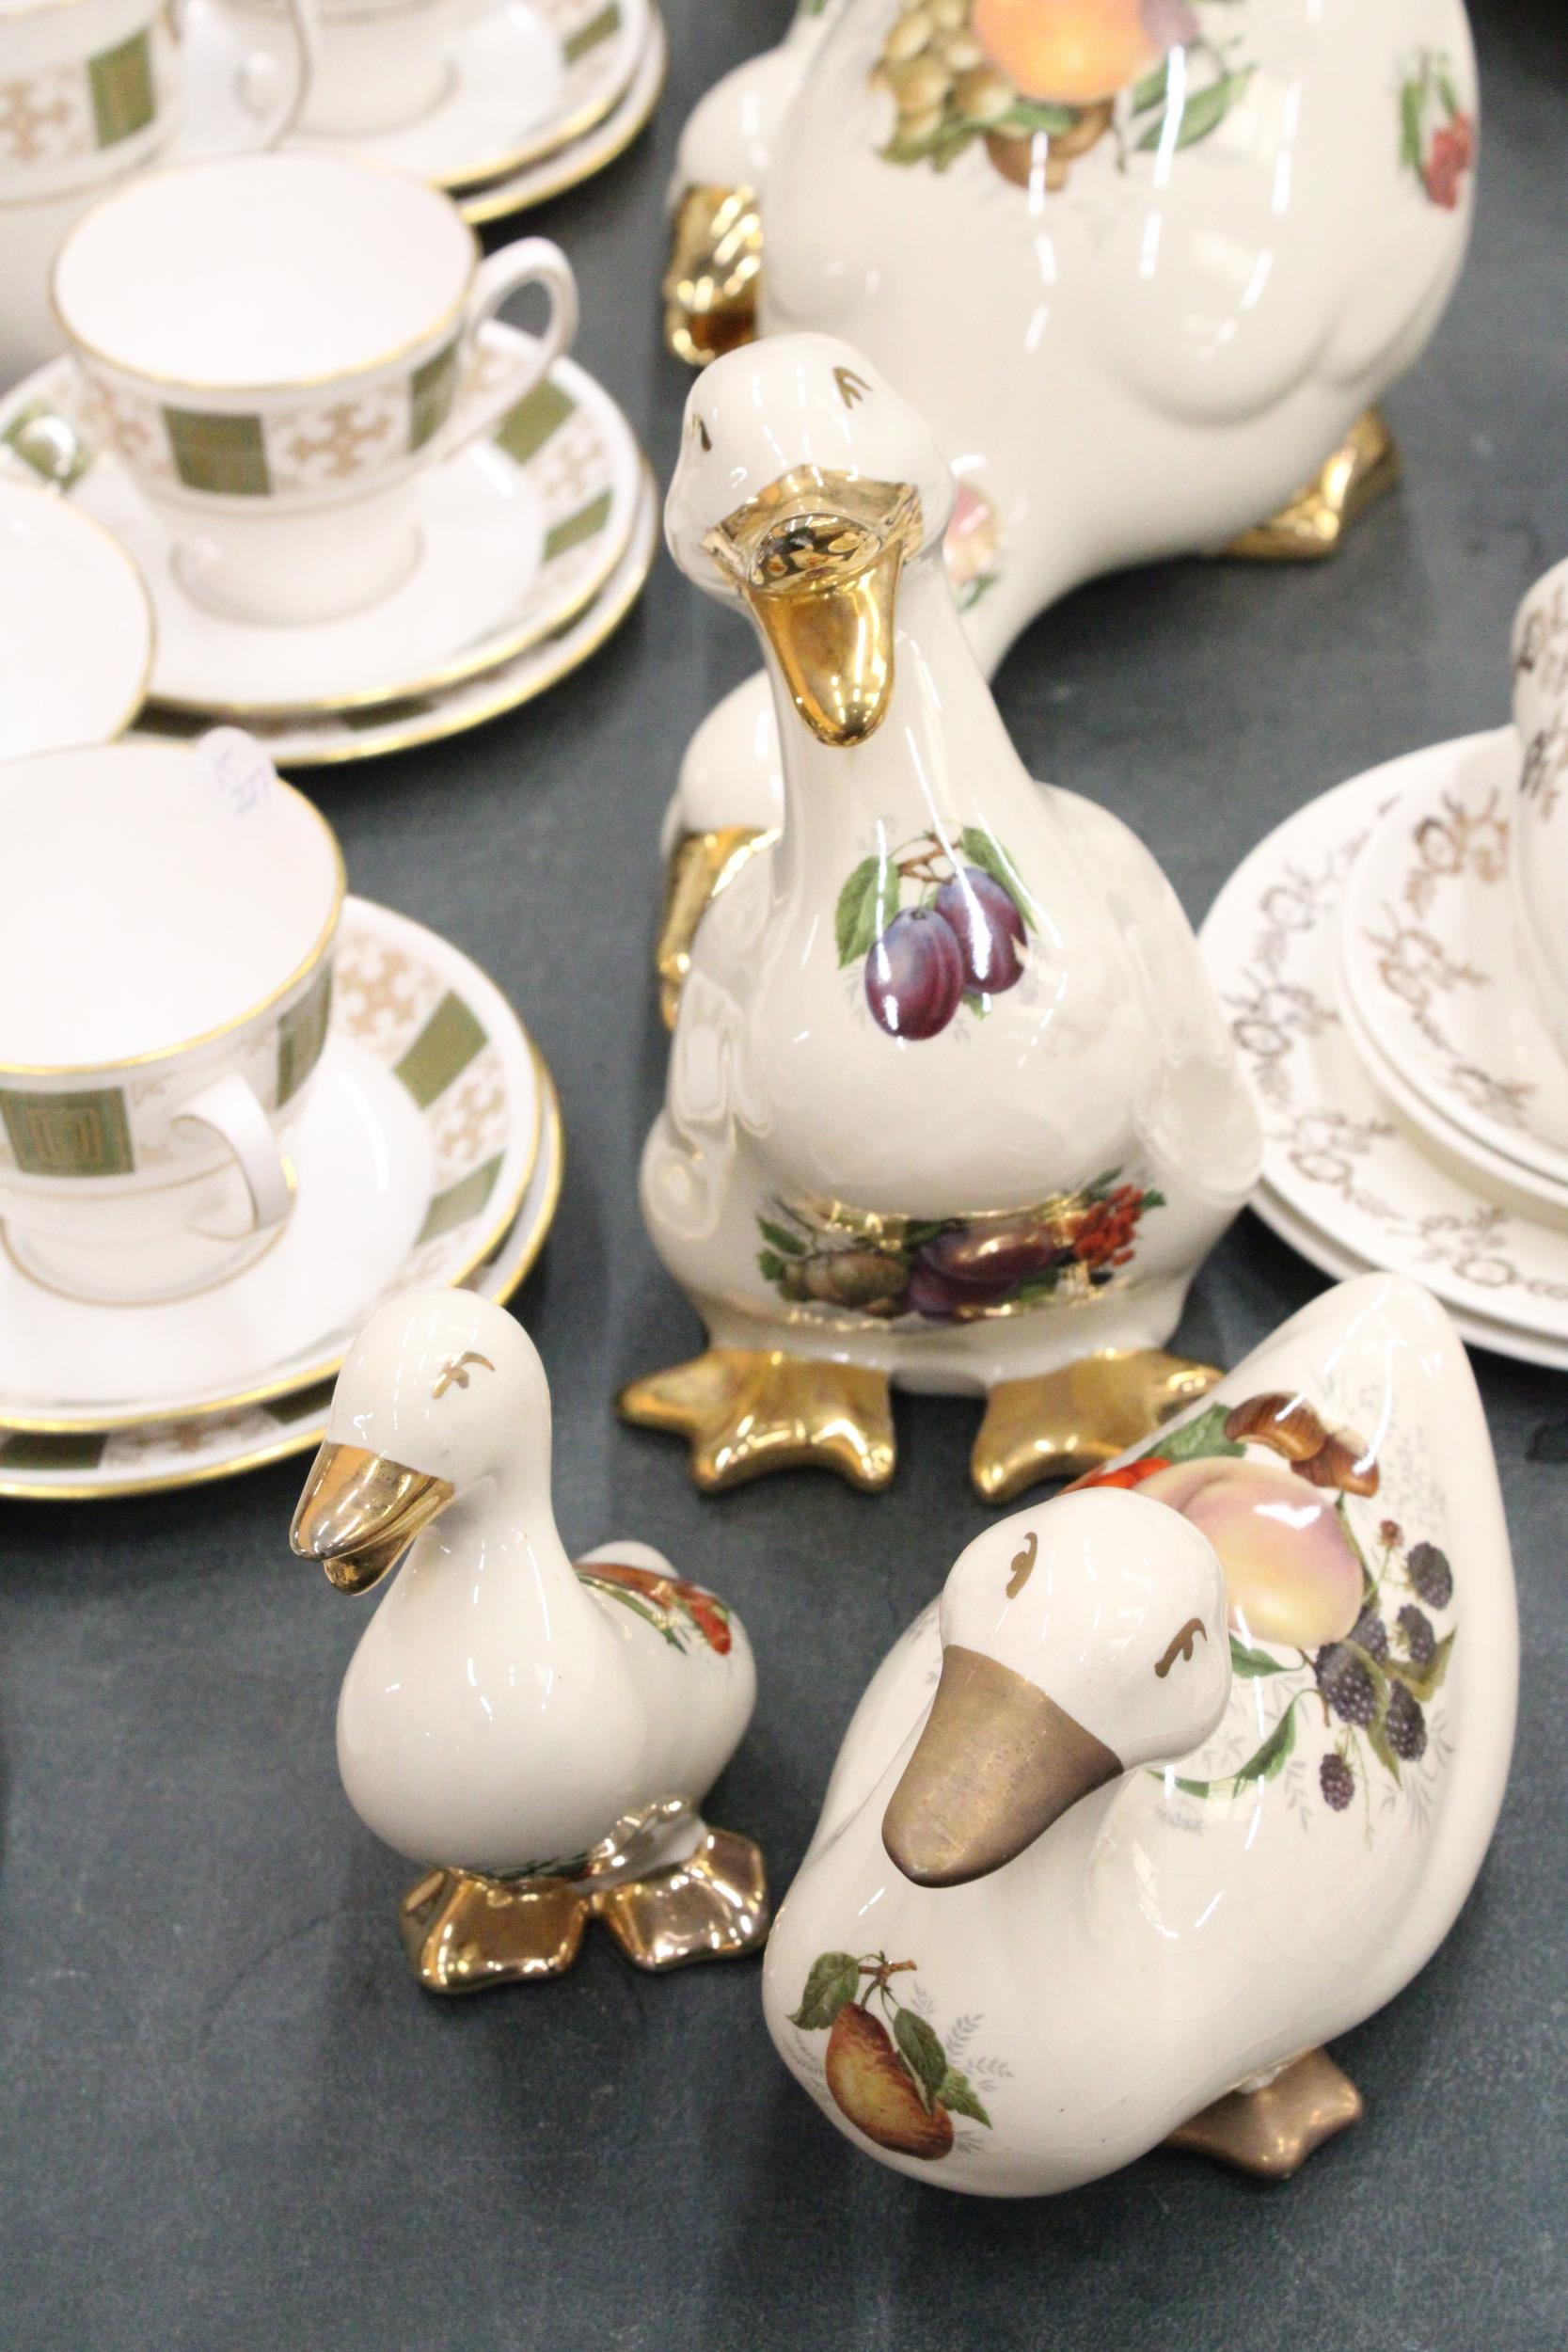 FIVE STAFFORDSHIRE CERAMIC 'FRUIT' DUCKS IN VARYING SIZES - Image 2 of 5